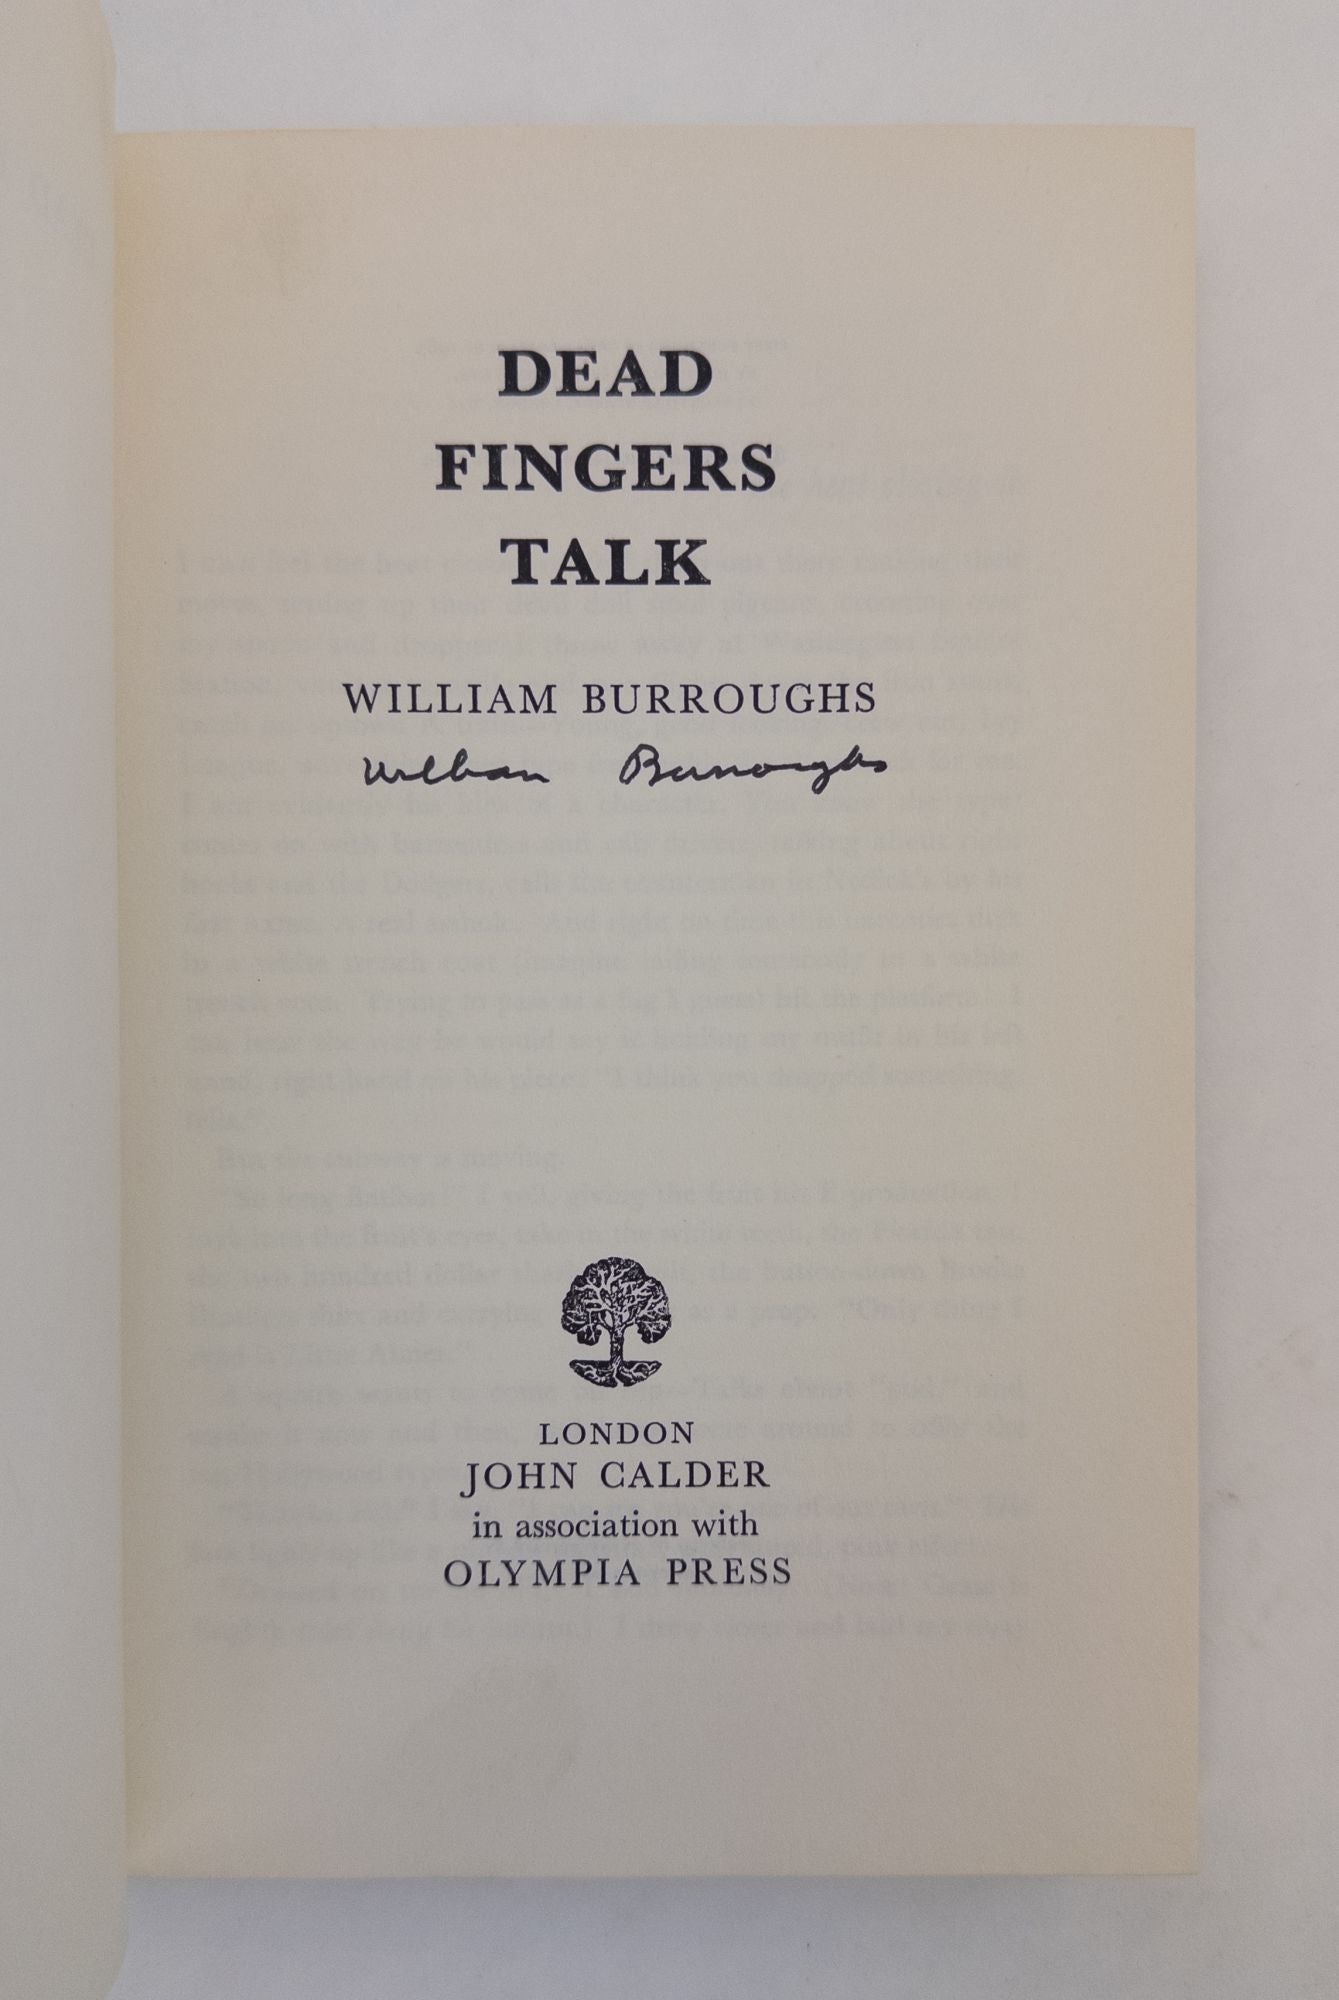 Product Image for DEAD FINGERS TALK [Signed]